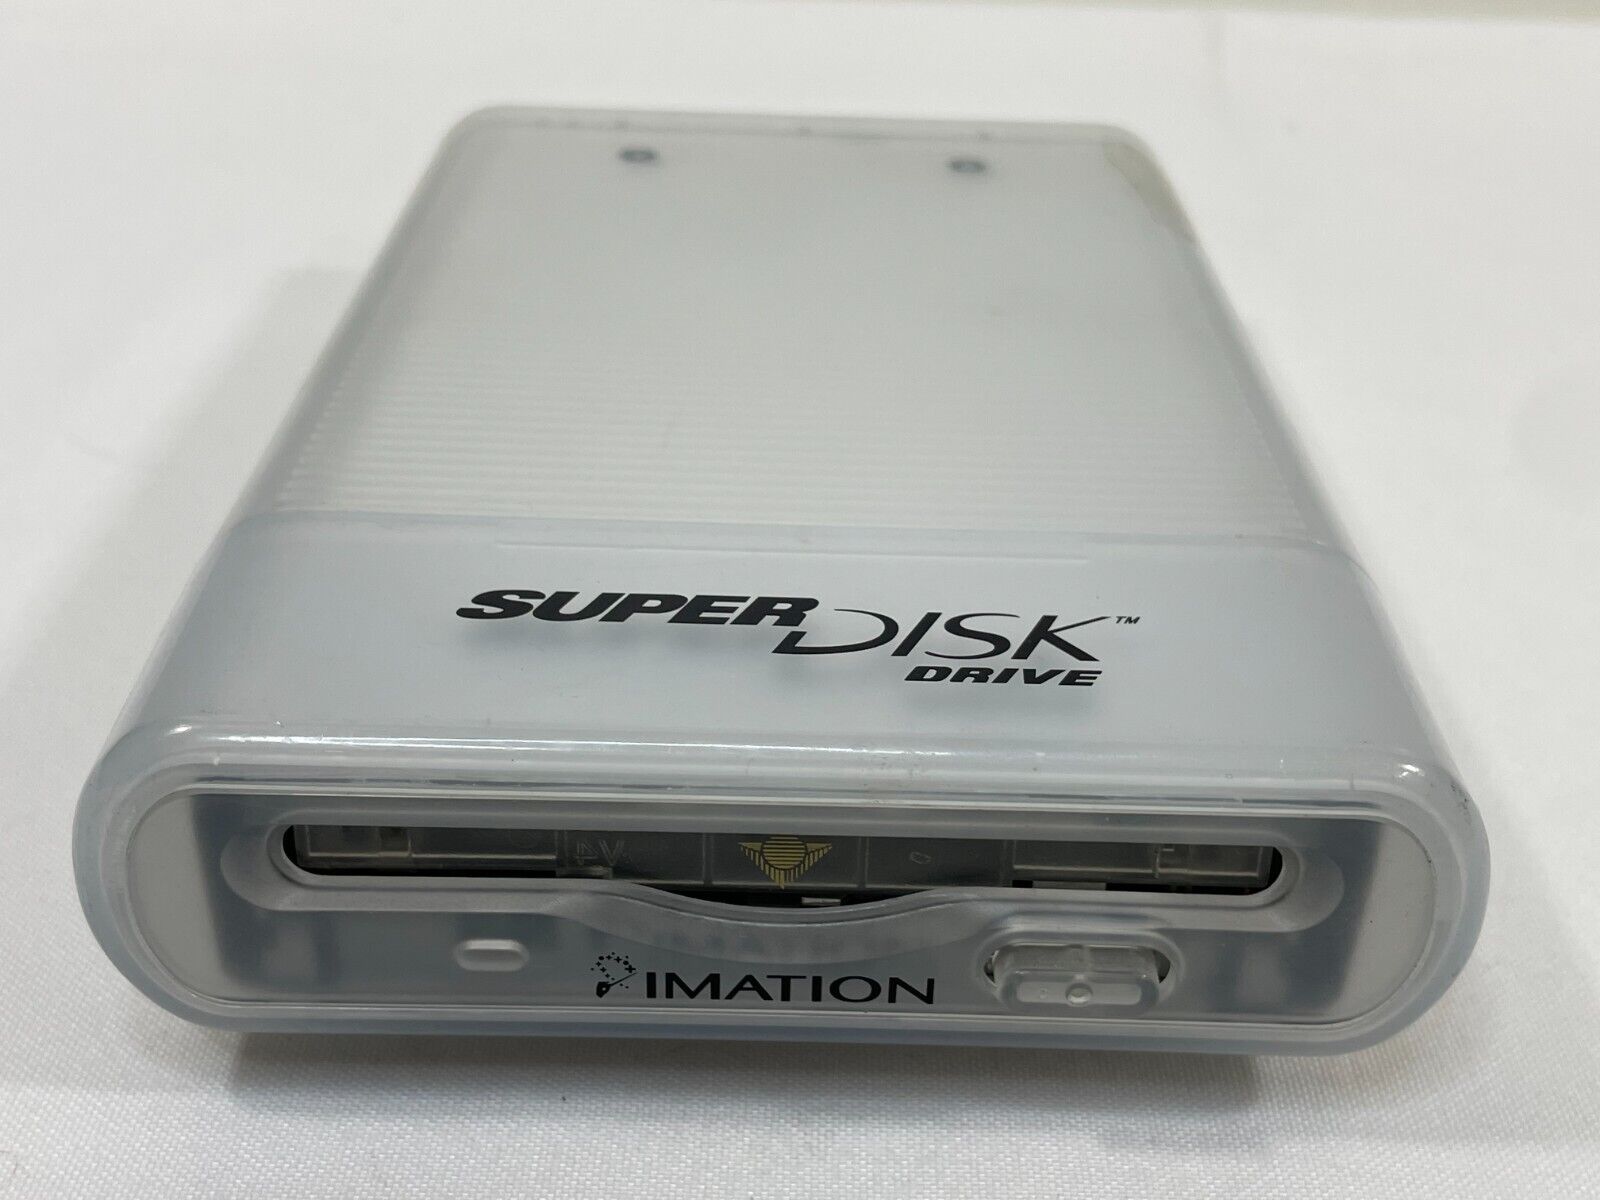 Imation Super Disk USB Drive for Macintosh Model SD-USB-M2 - UNTESTED